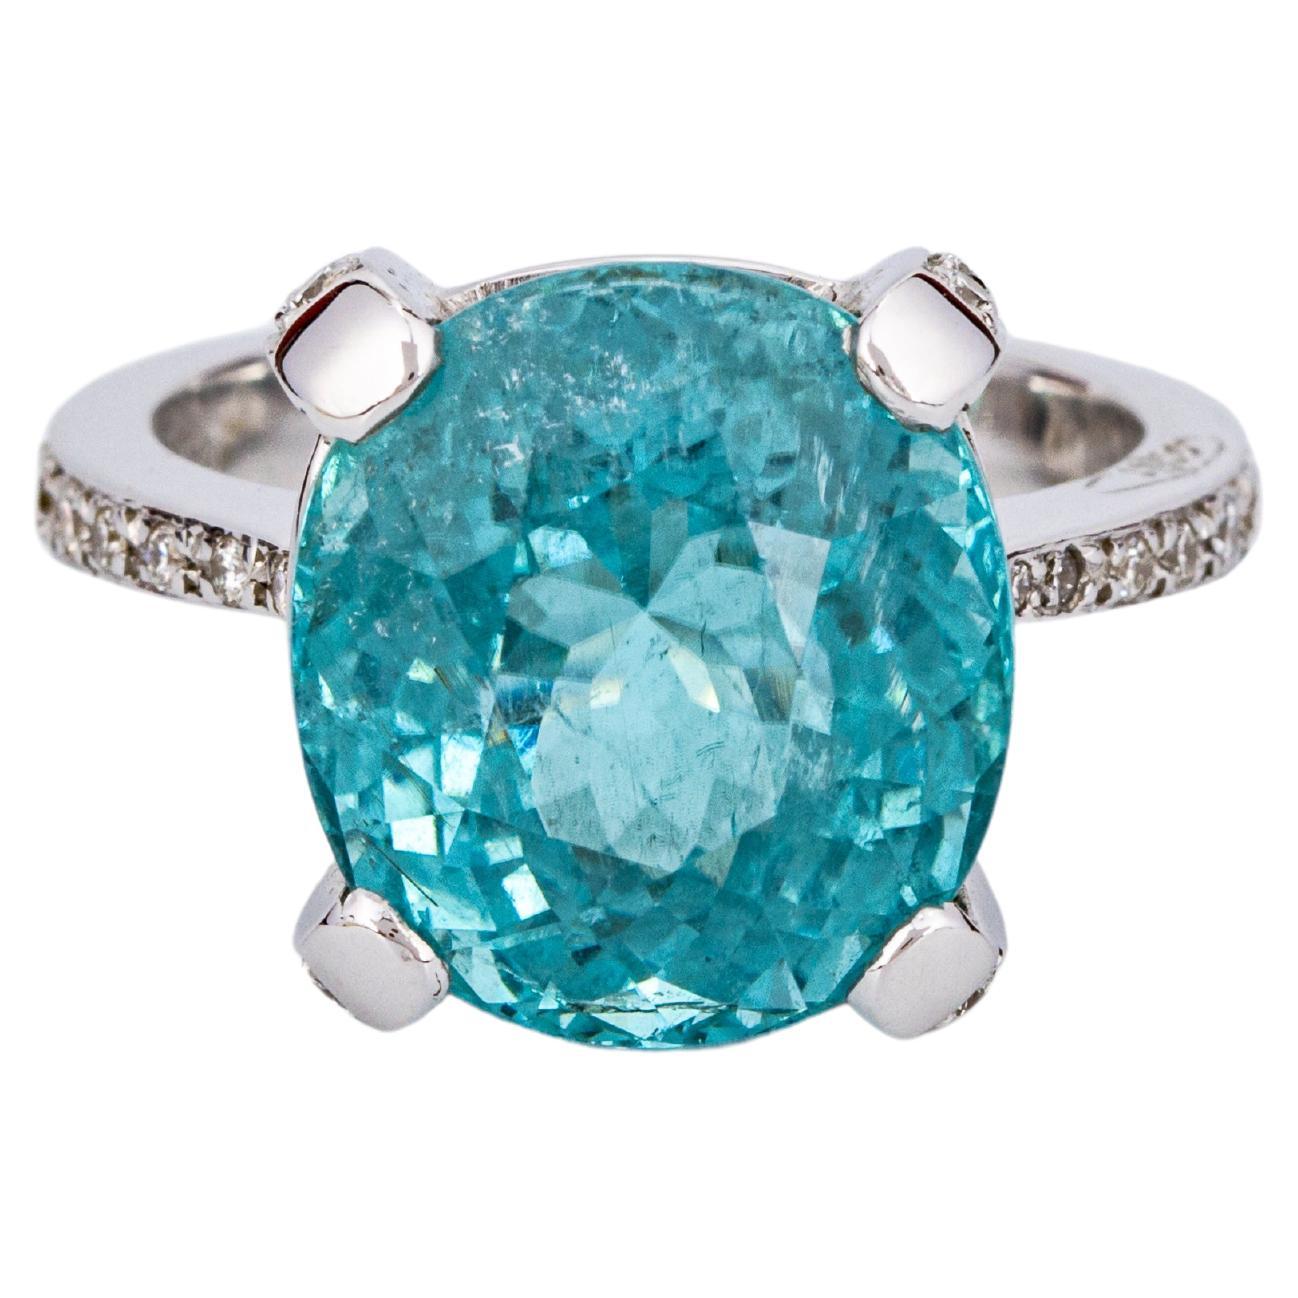 "Costis" Four Claw Ring with 11.97 crts African Paraiba Tourmaline and Diamonds For Sale